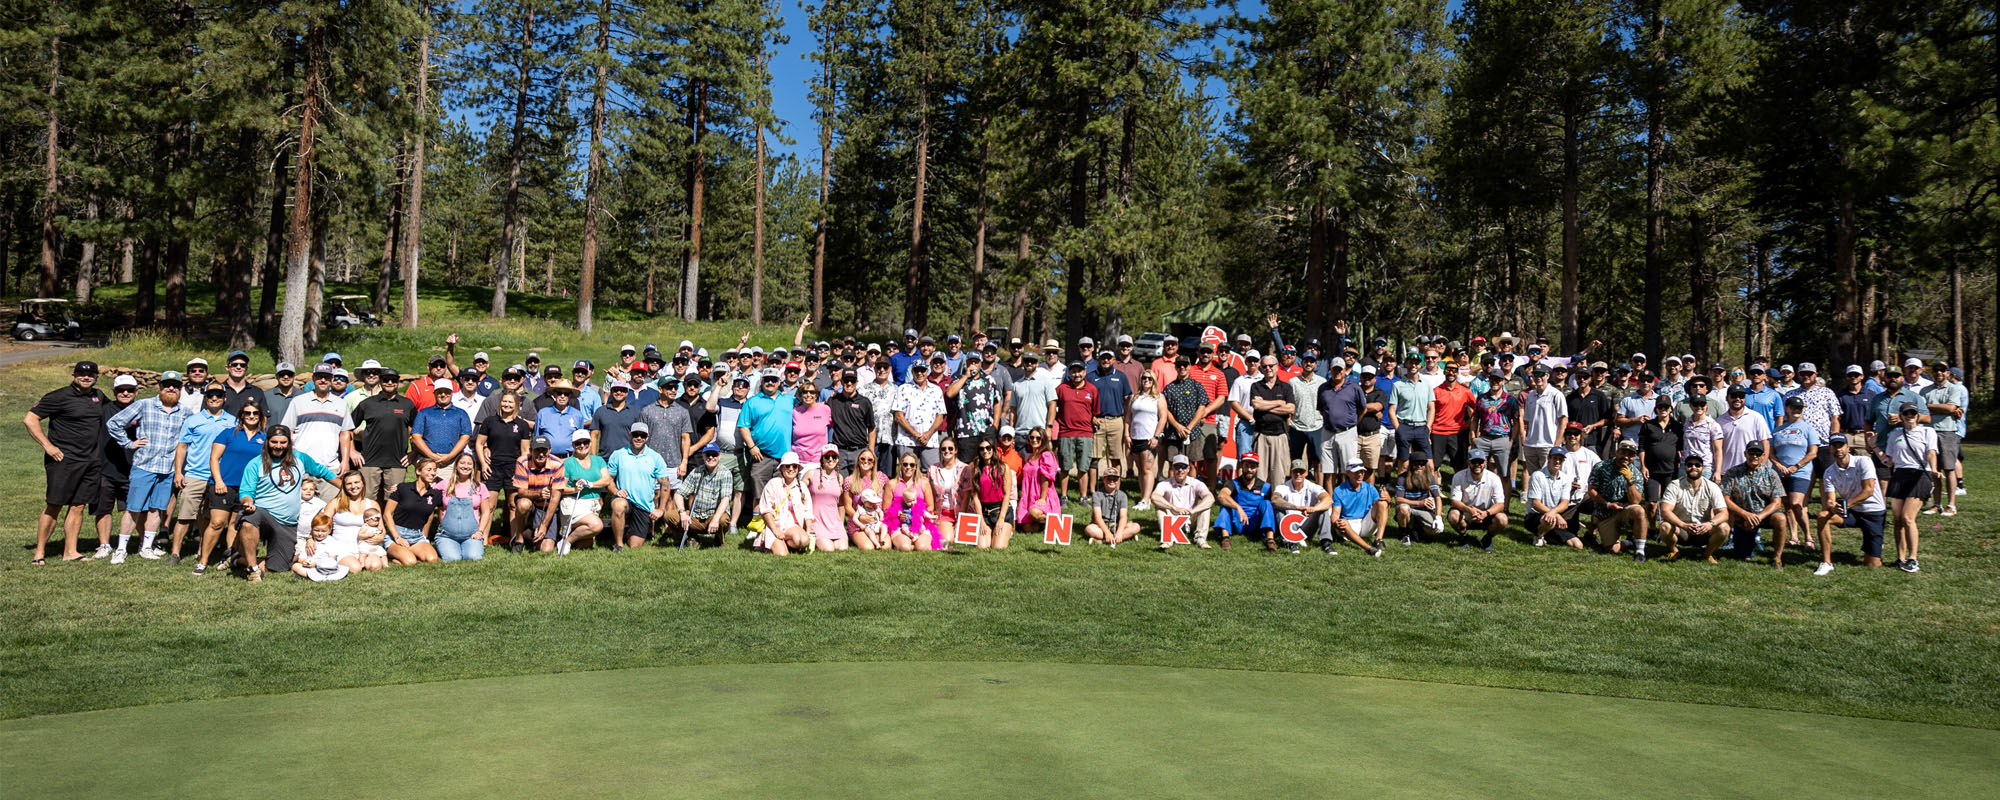 ENKC group on Tahoe Donner Golf Couse